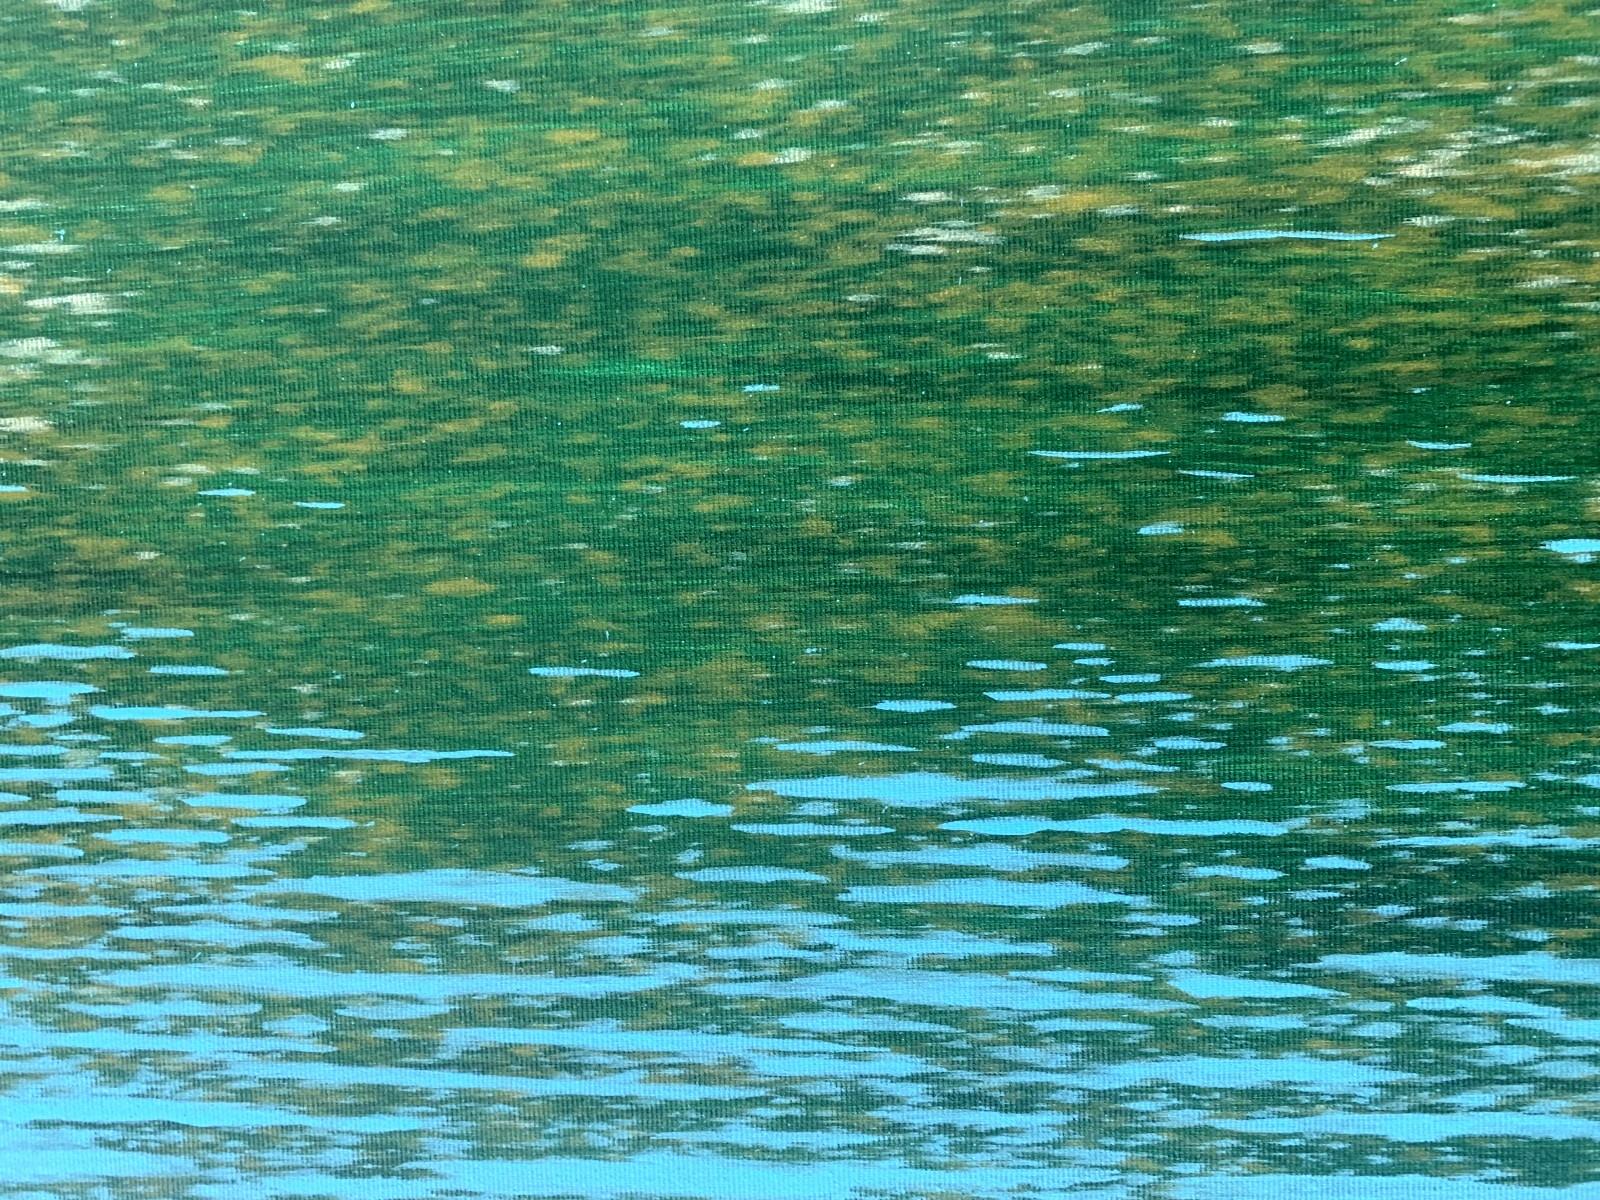 Noise. Acrylics Painting, Waterscape & Abstract, Green & blue, Polish artist For Sale 2